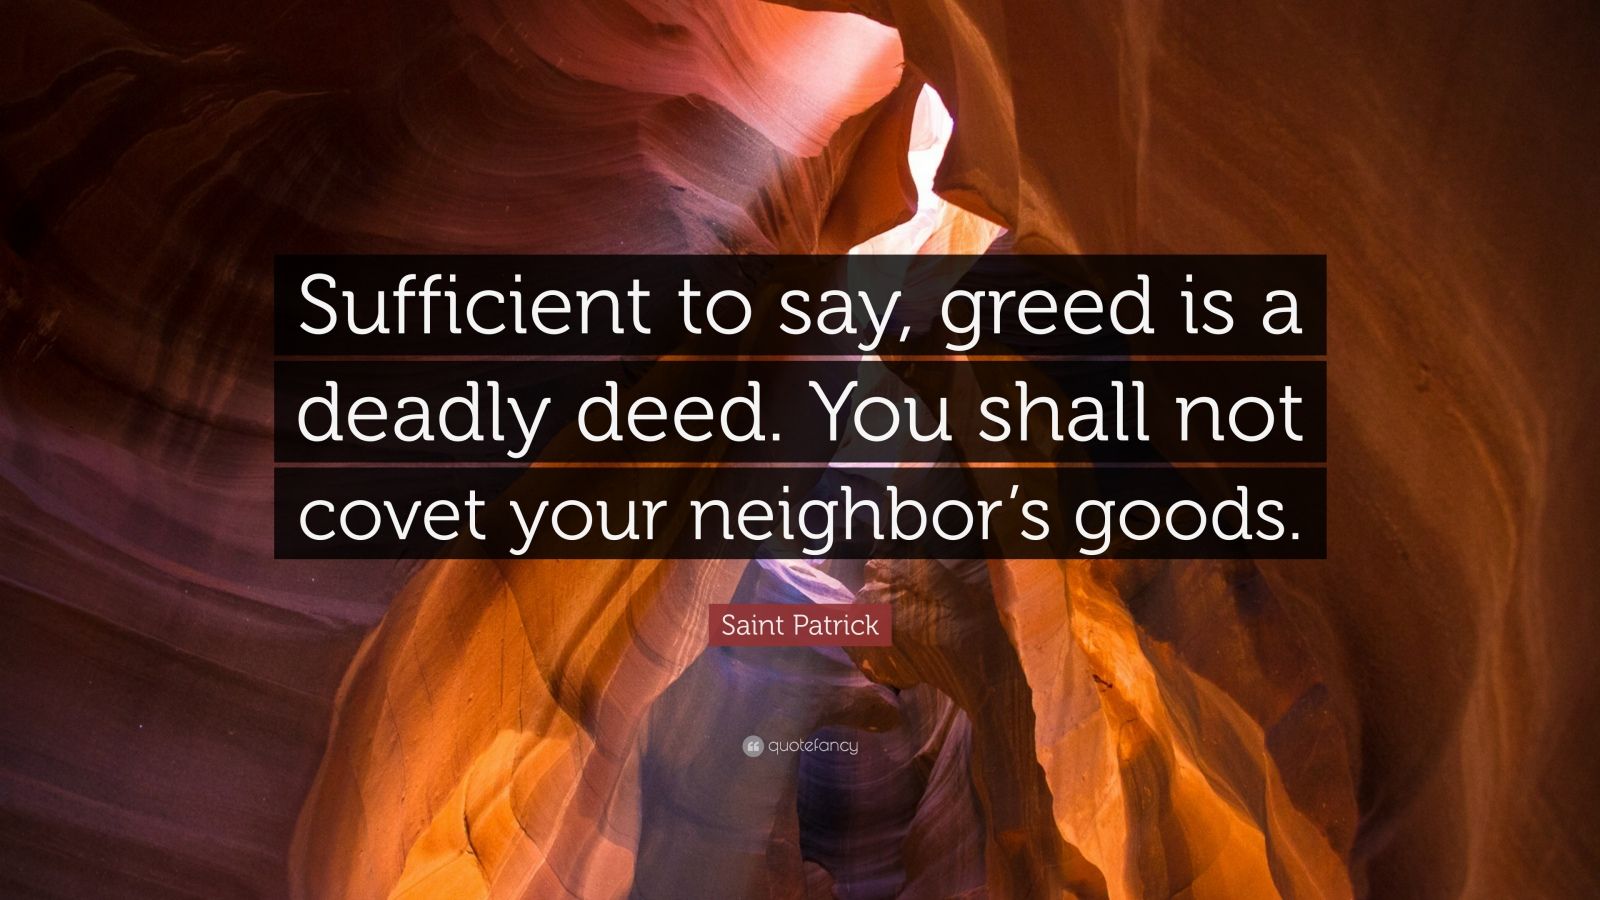 Saint Patrick Quote “sufficient To Say Greed Is A Deadly Deed You Shall Not Covet Your